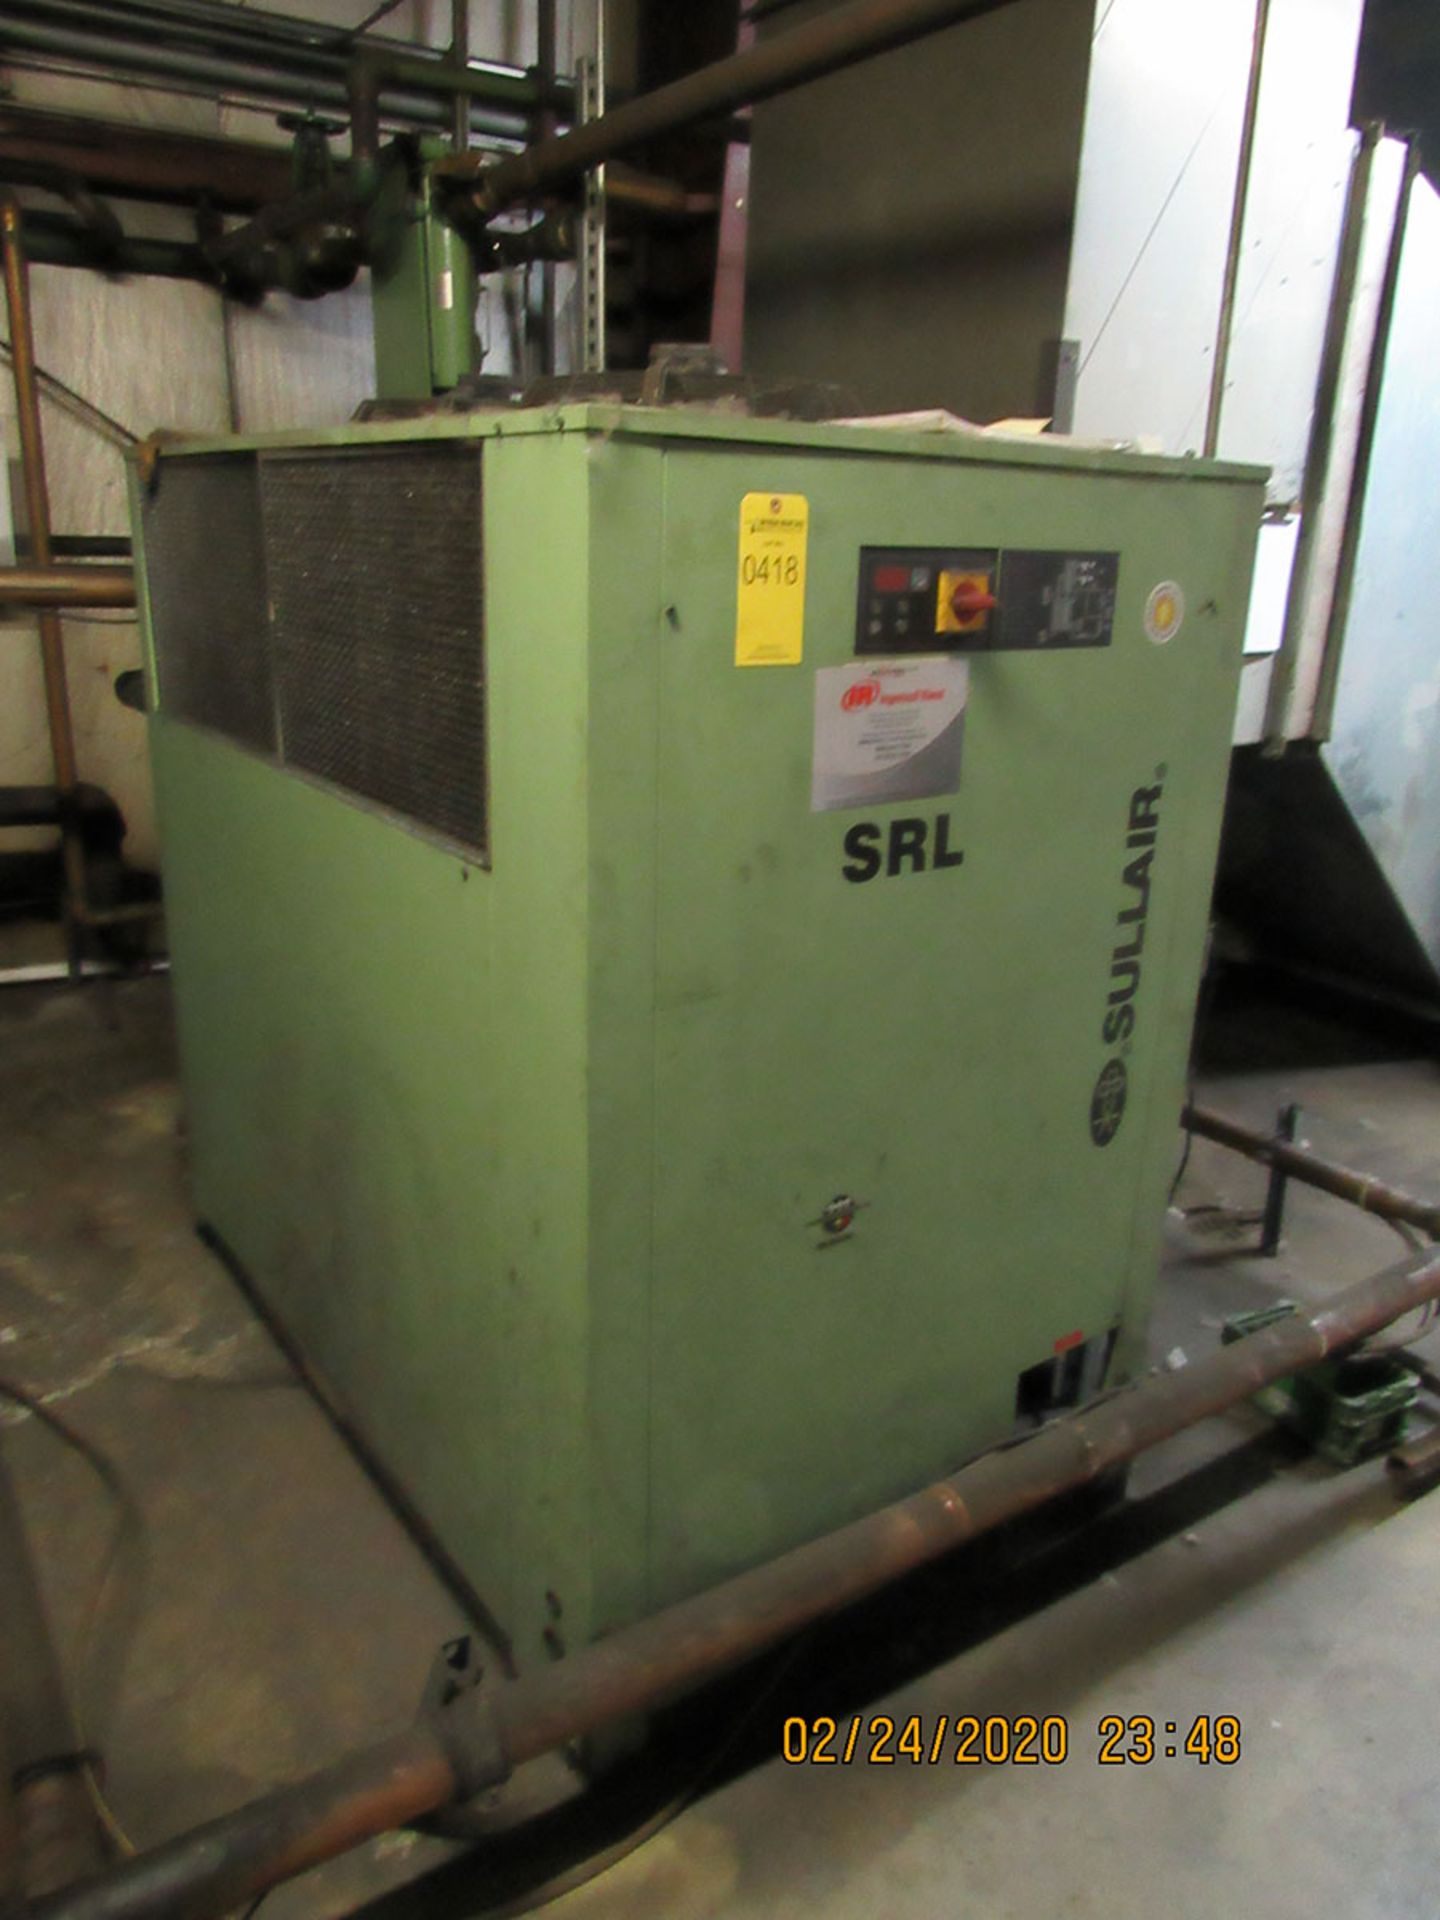 SULLAIR COMPRESSED AIR DRYER; MODEL SRL-1600, S/N 356760001, WITH MICROPROCESSOR CONTROLS